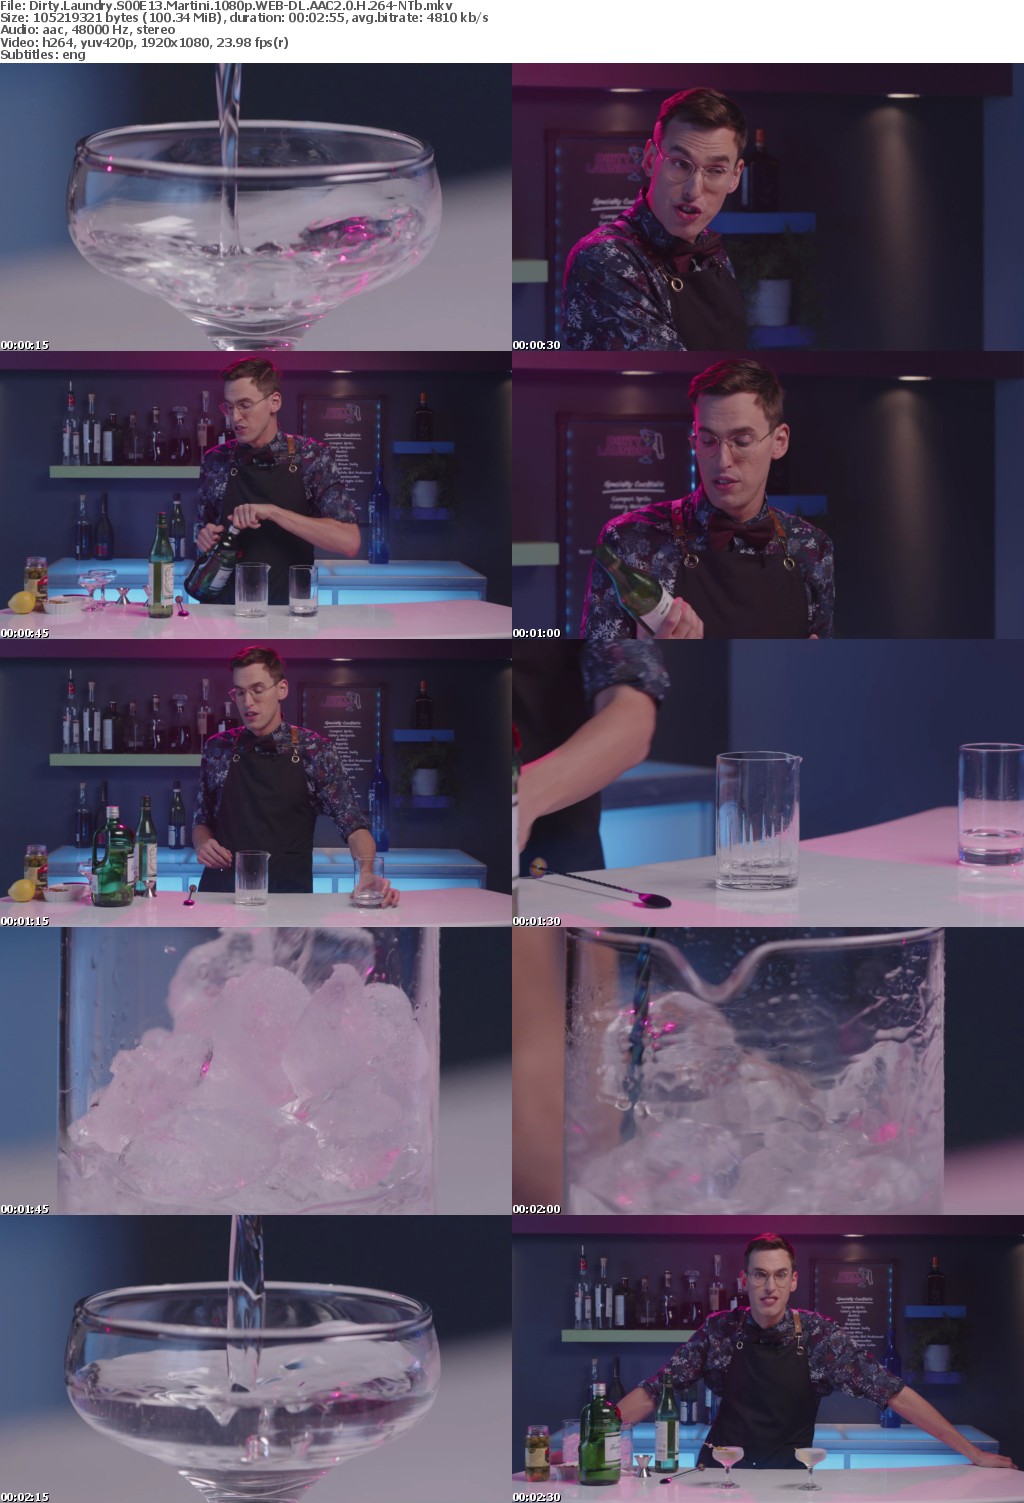 Dirty Laundry S00E13 Martini 1080p WEB-DL AAC2 0 H 264-NTb